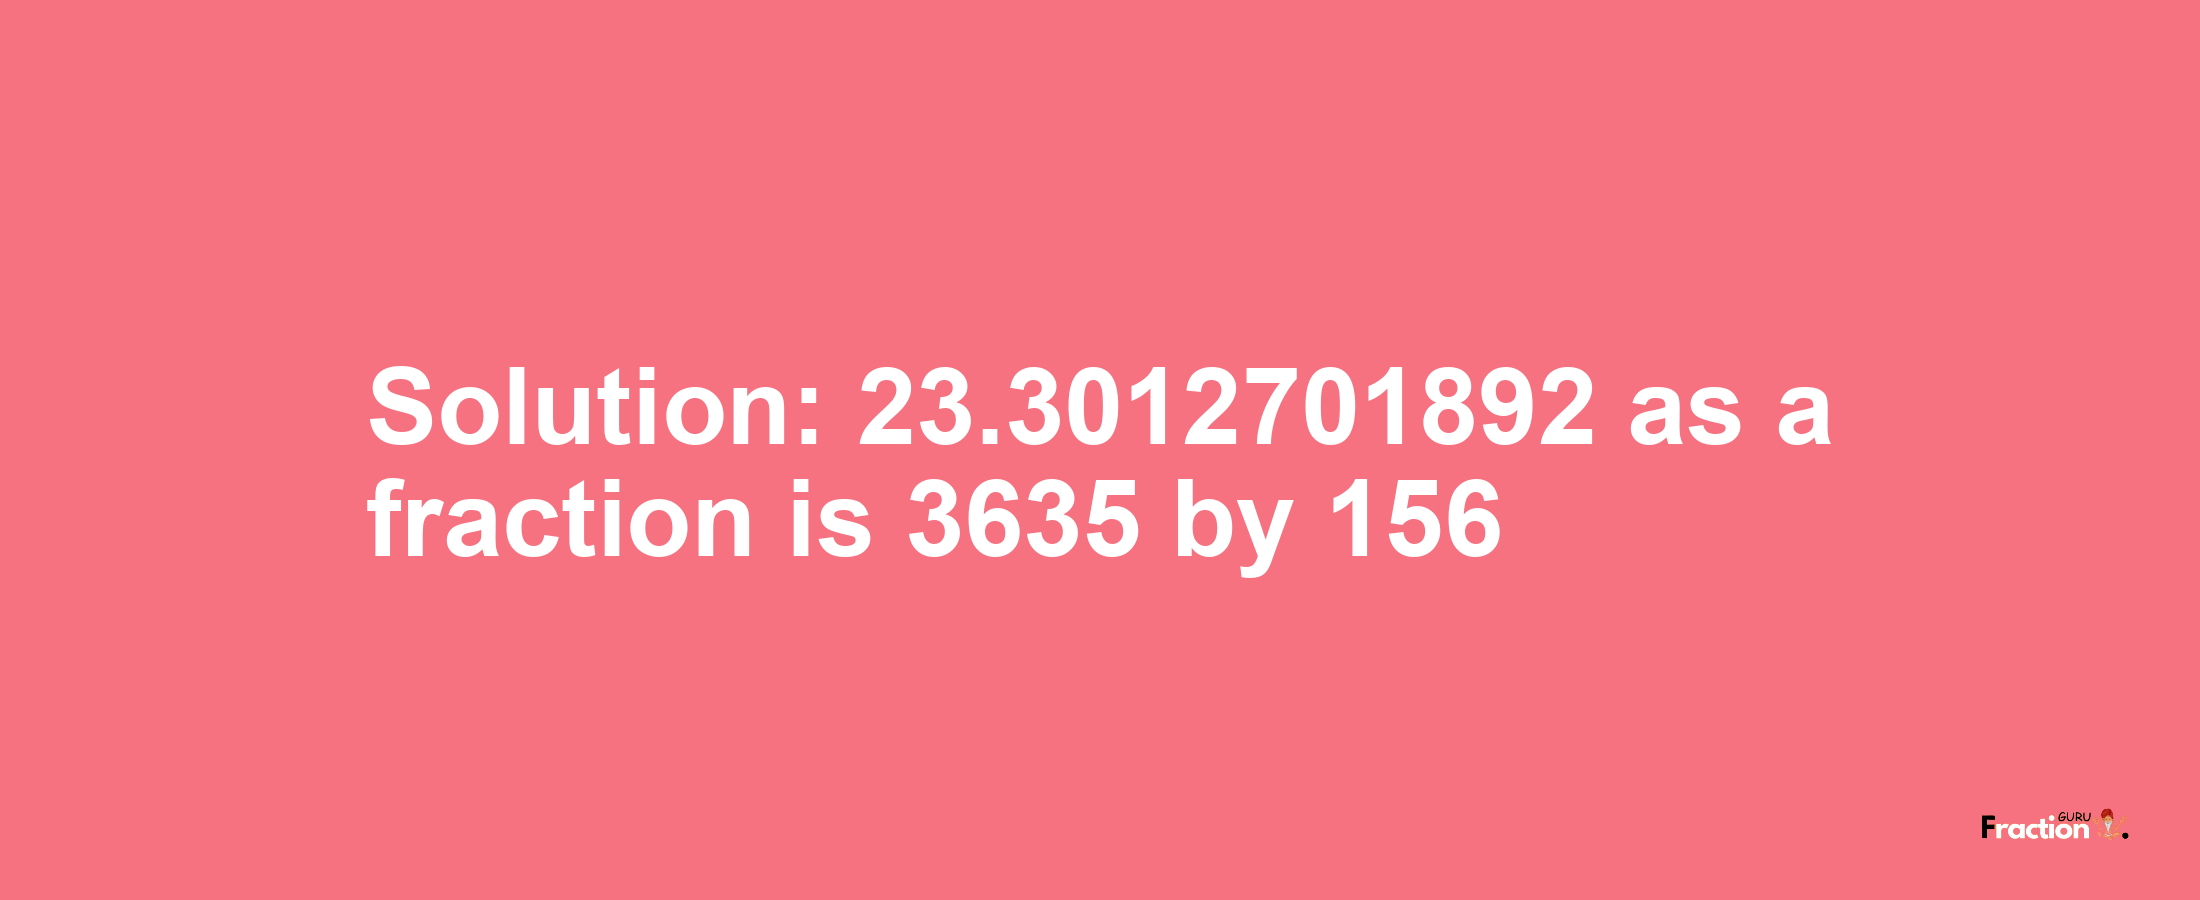 Solution:23.3012701892 as a fraction is 3635/156